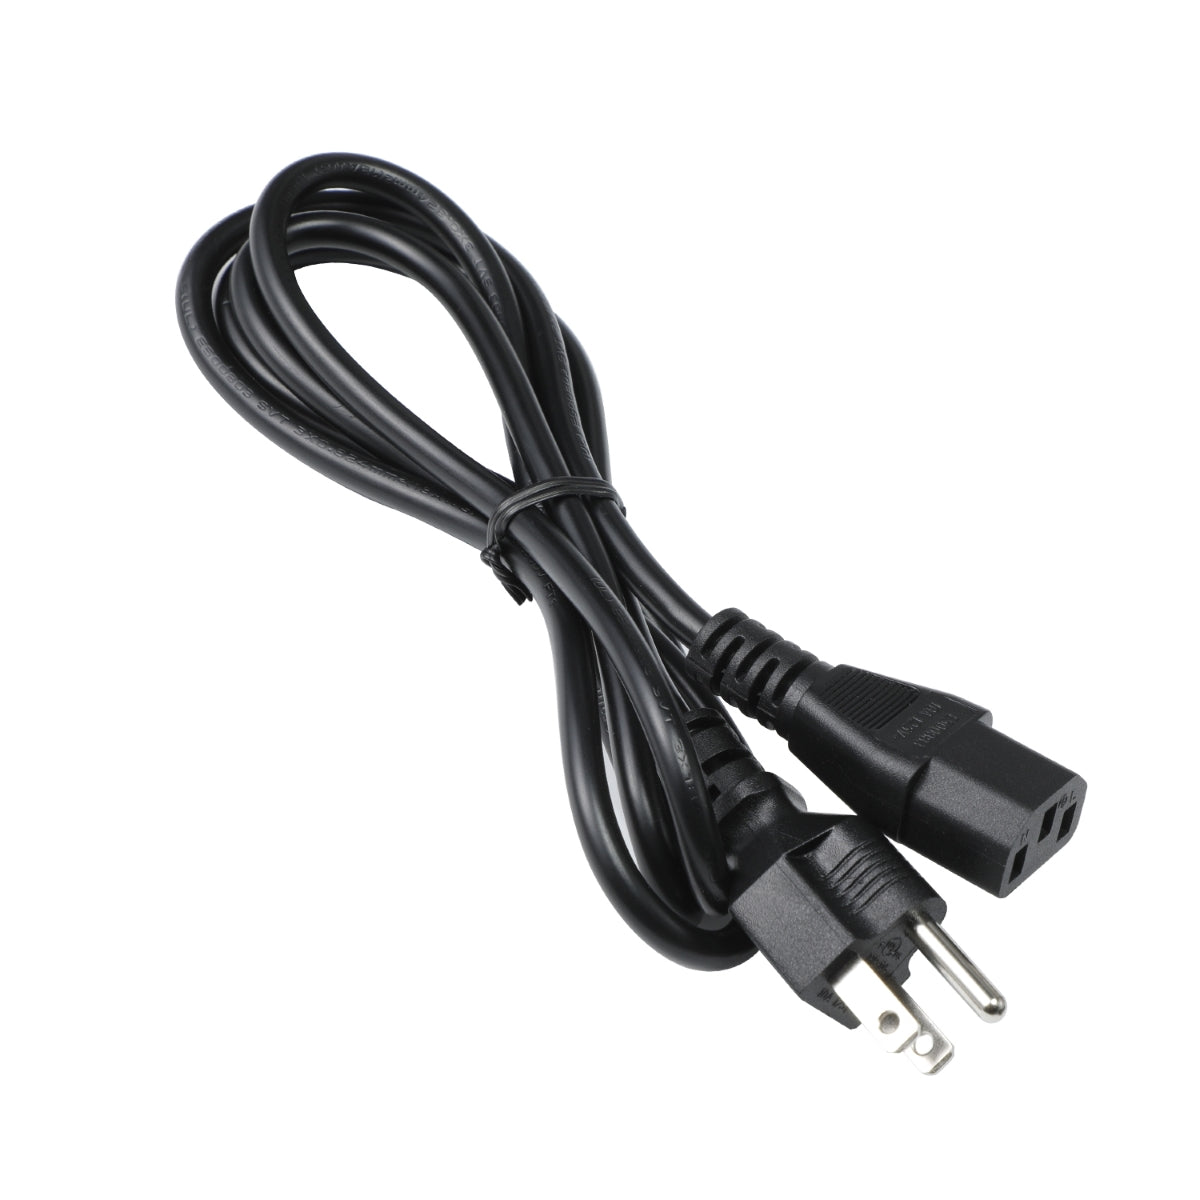 Power Cord for HP Pavilion 550-026 Computer.